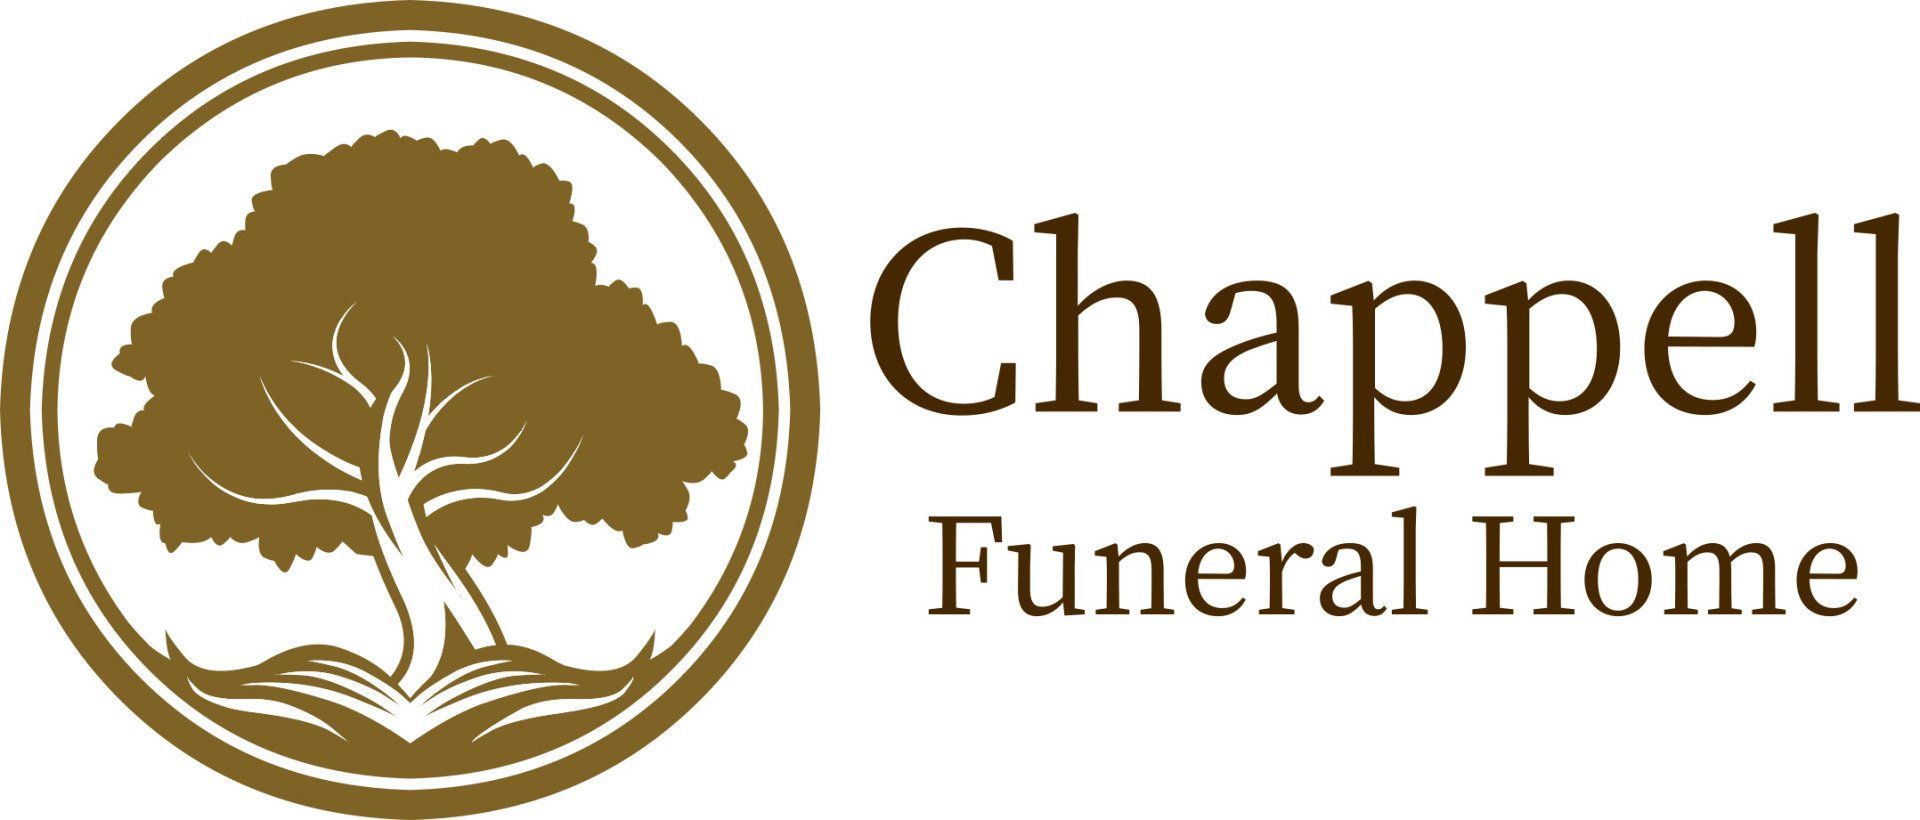 Chappell Funeral Home logo